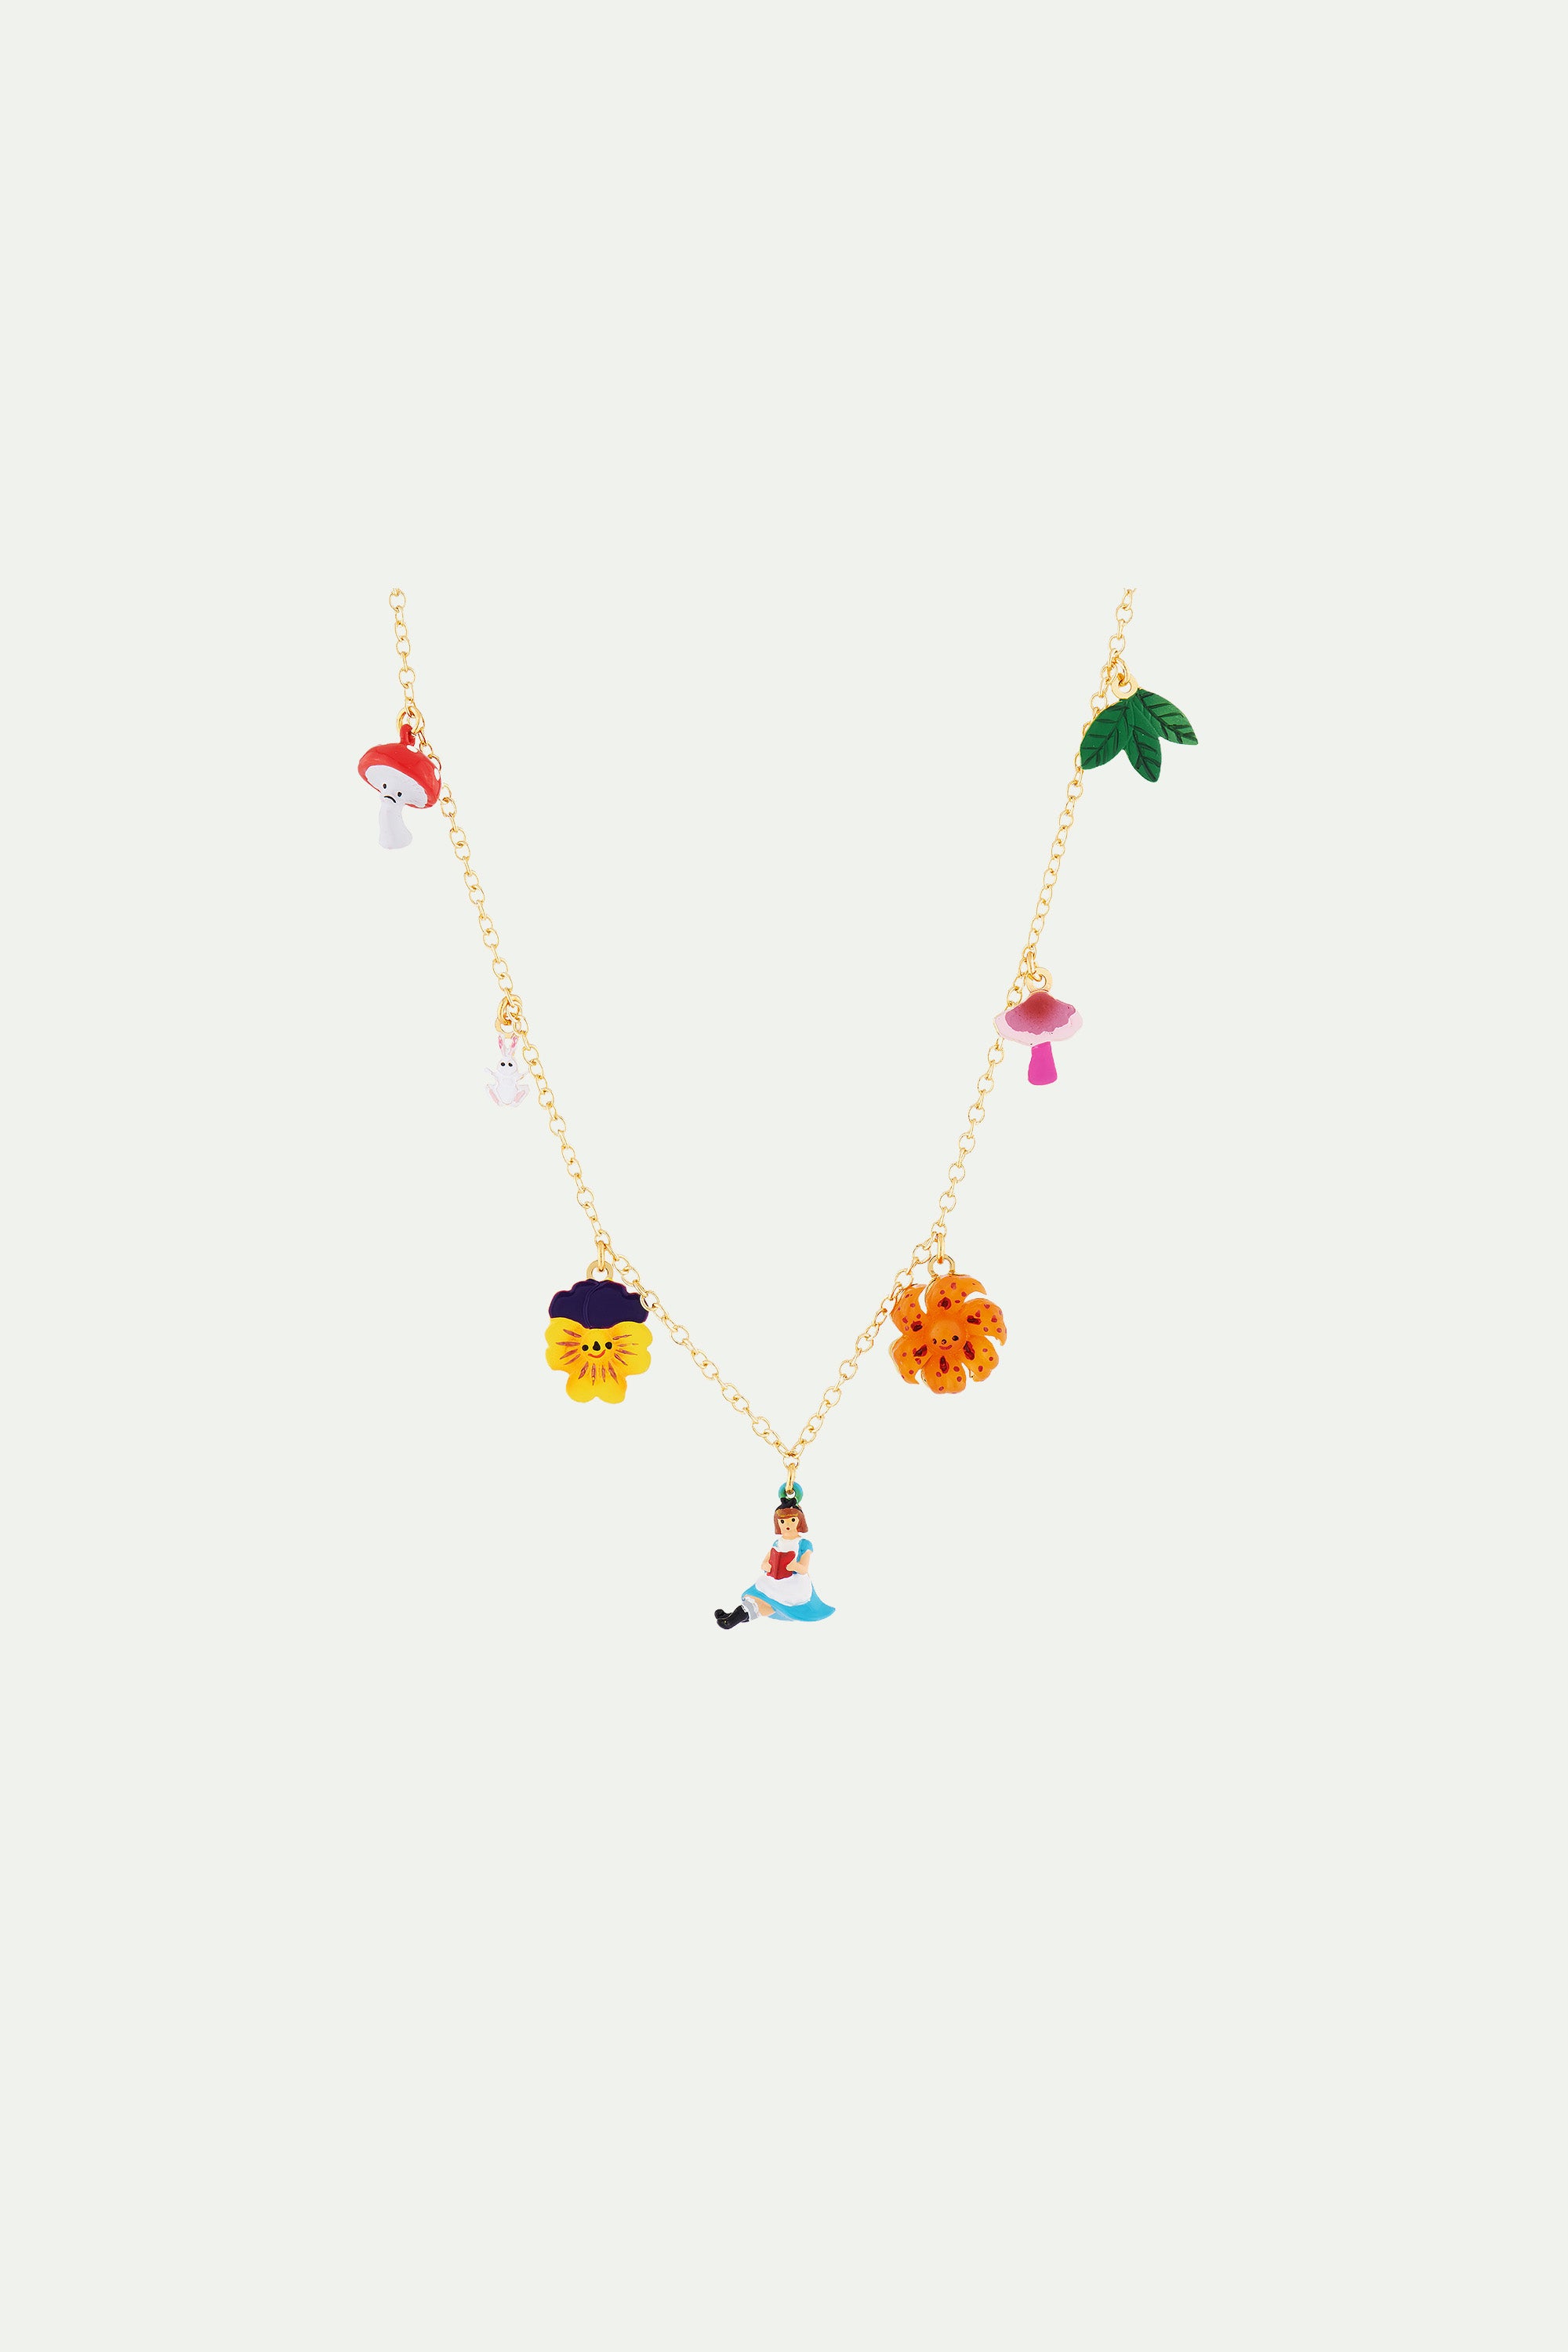 Alice, Flowers, Mushrooms and White Rabbit Thin Necklace